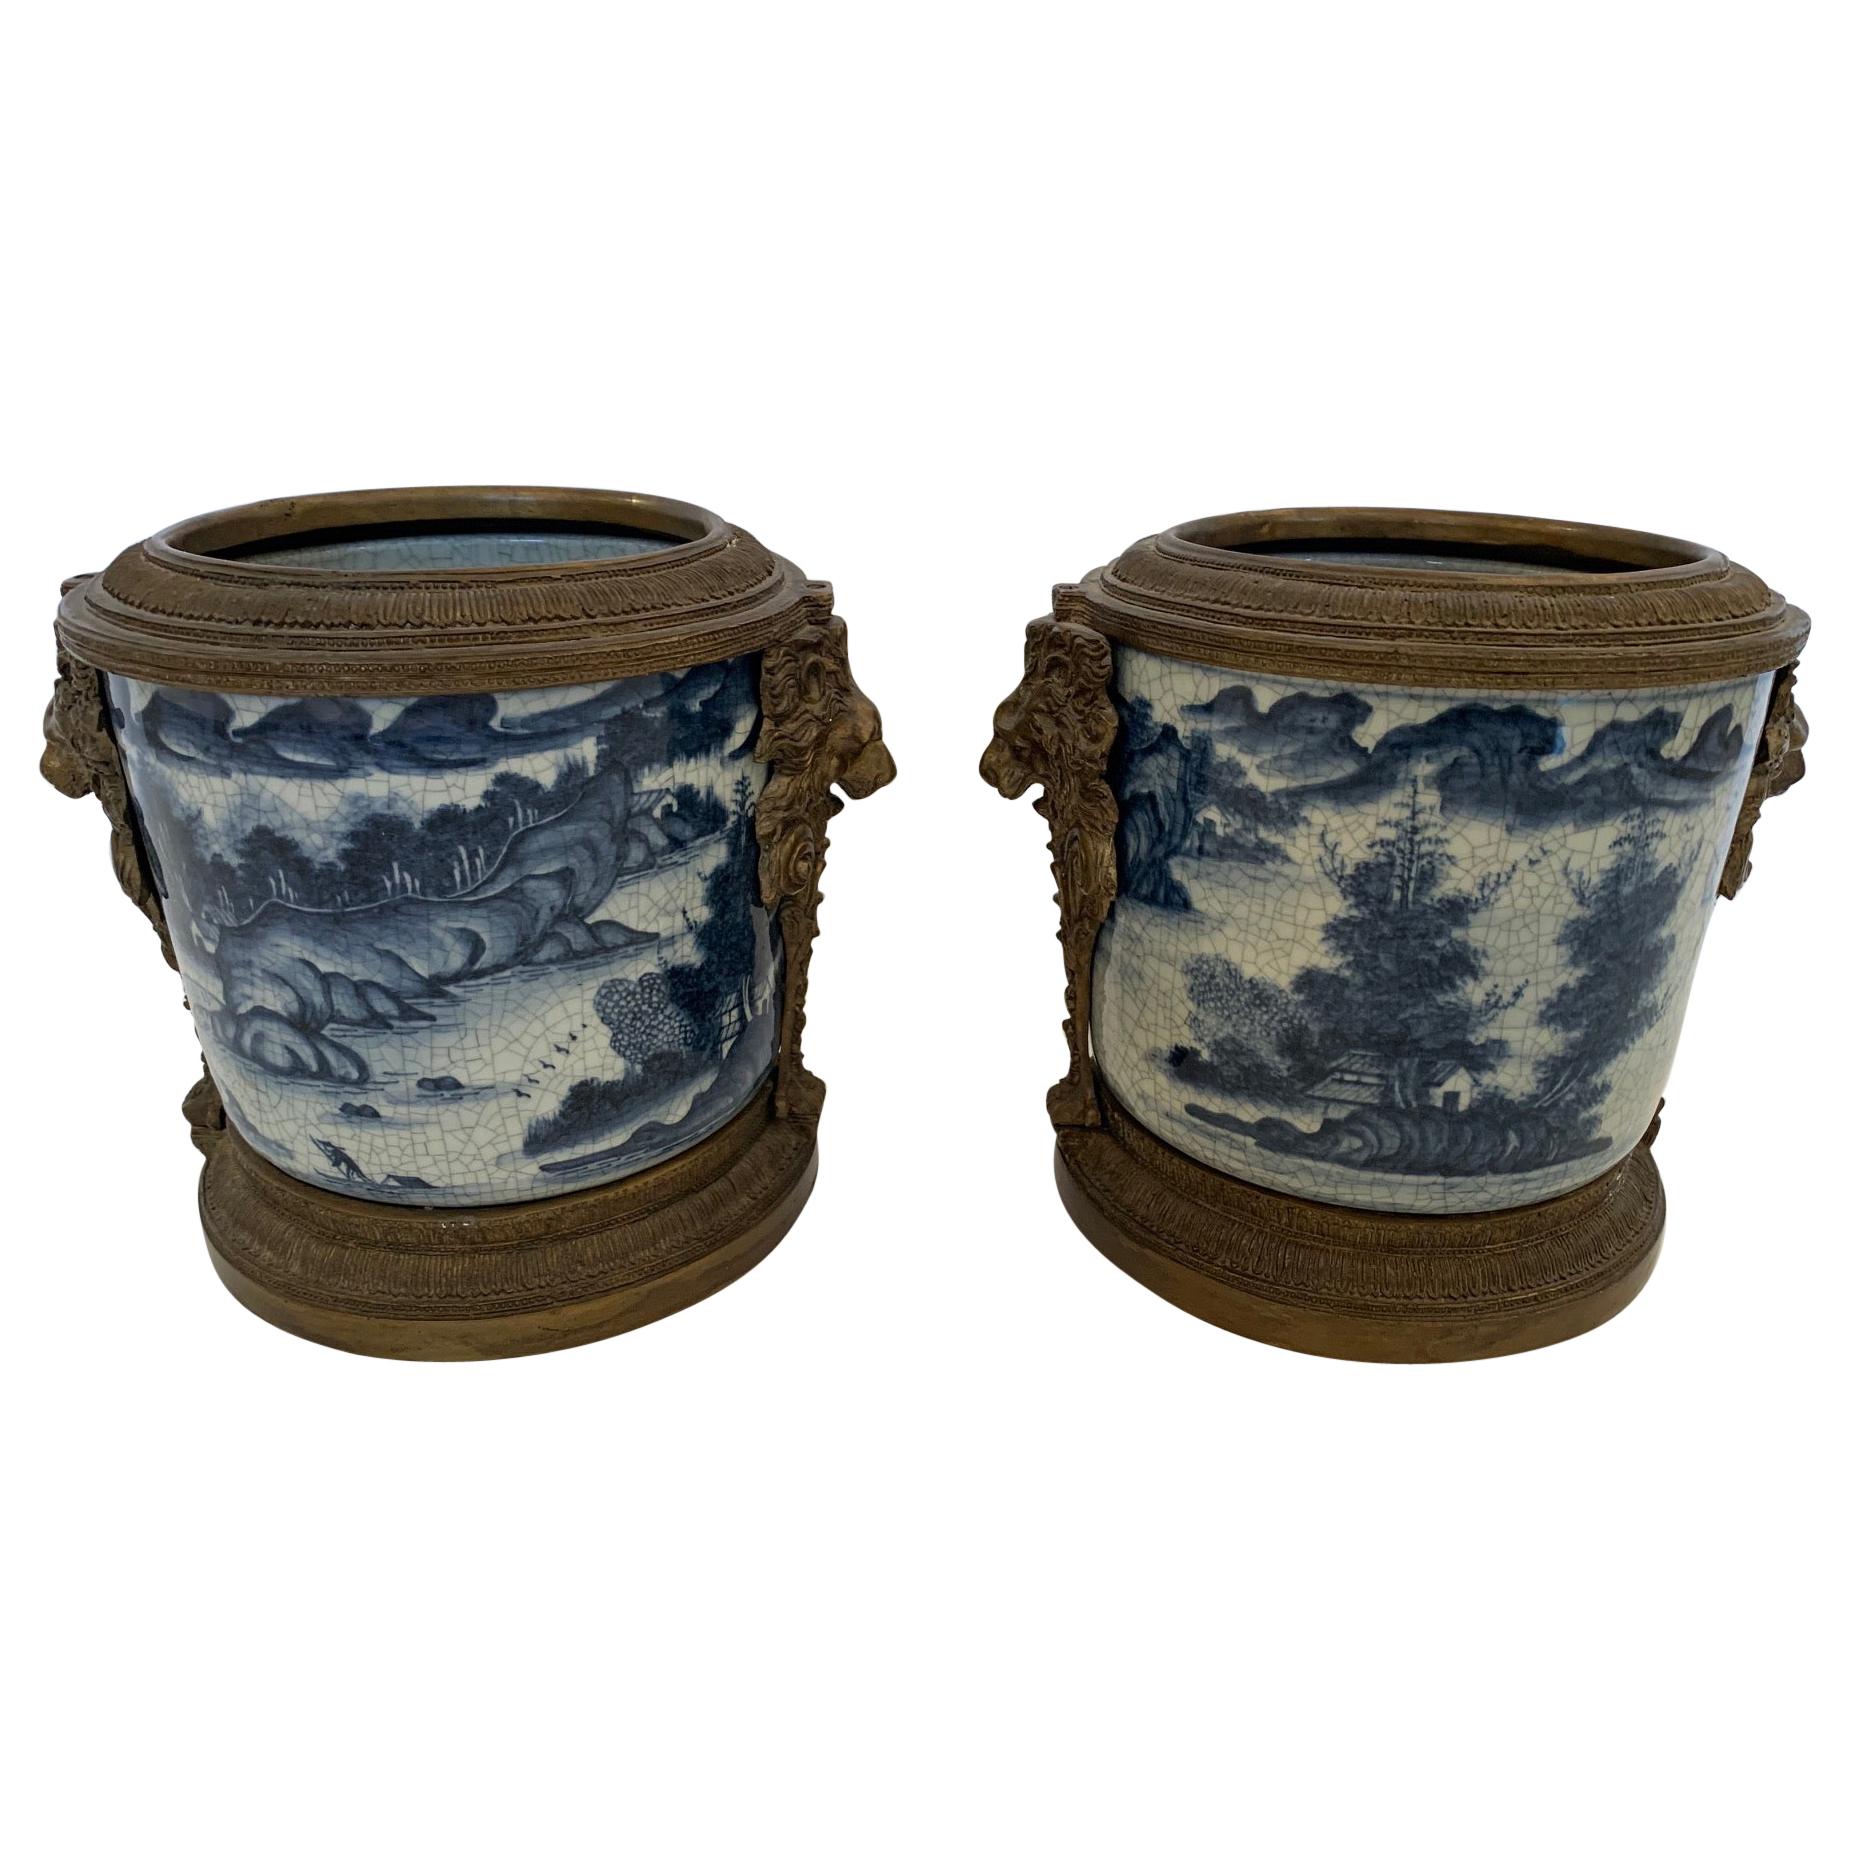 Pair of Asian Style Blue and White Flower Pots Cachepots with Bronze Decoration